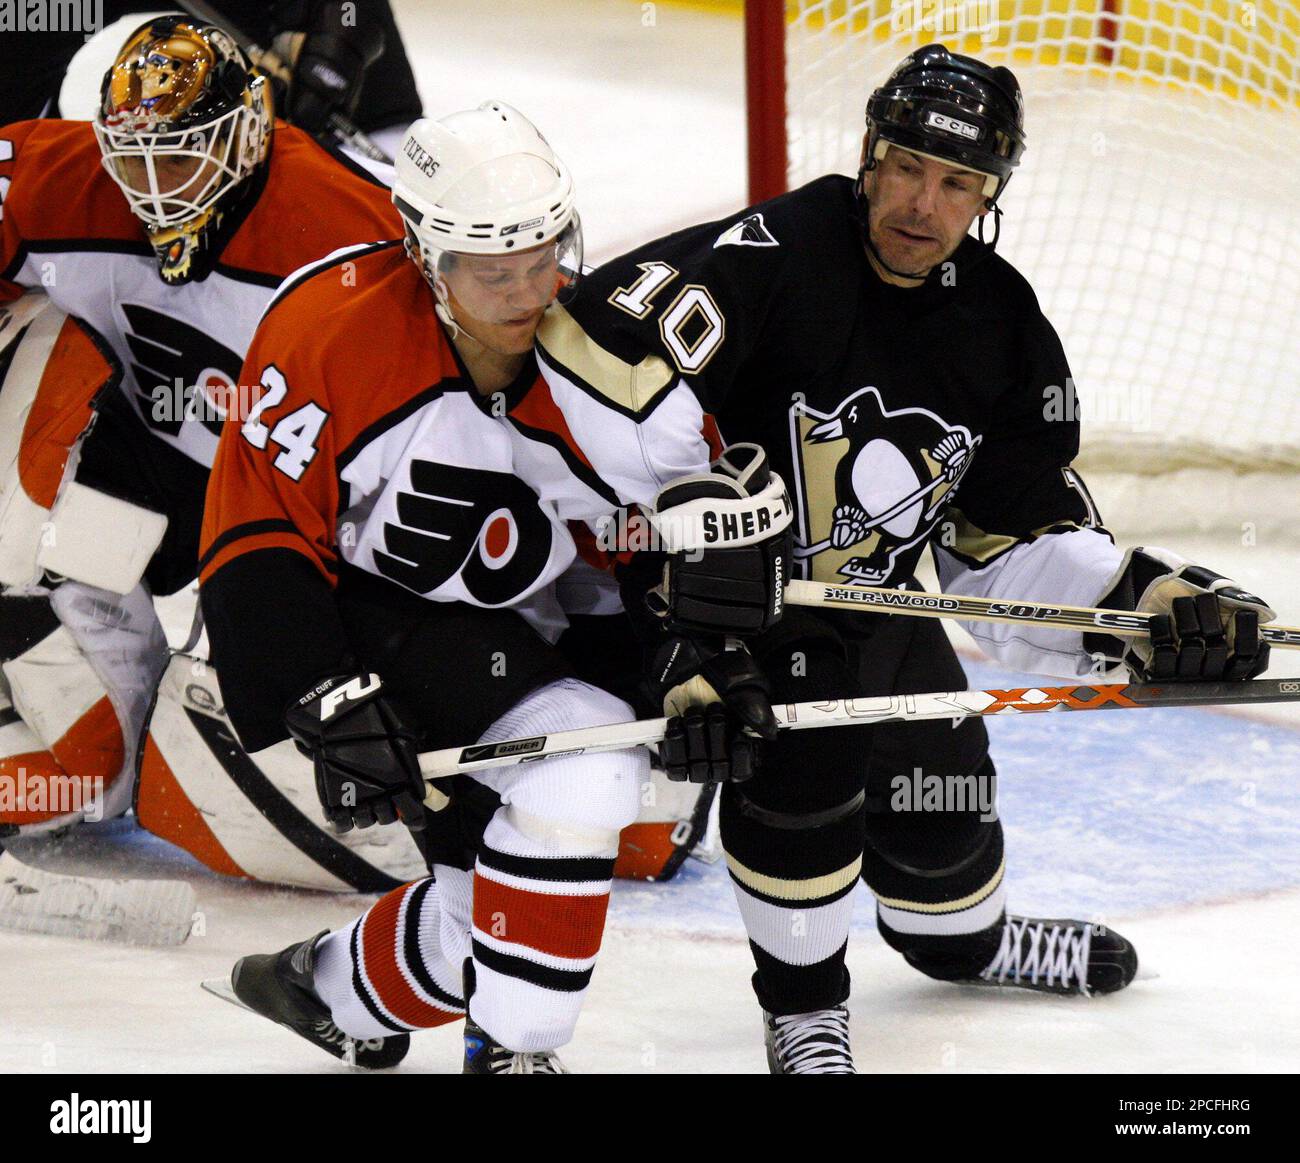 Pittsburgh Penguins' John LeClair (10) gets congratulated on his  second-period goal by teammate Sidney Crosby (87) during the Penguins' NHL  hockey game against the Carolina Hurricanes Friday, Feb. 10, 2006, in  Raleigh